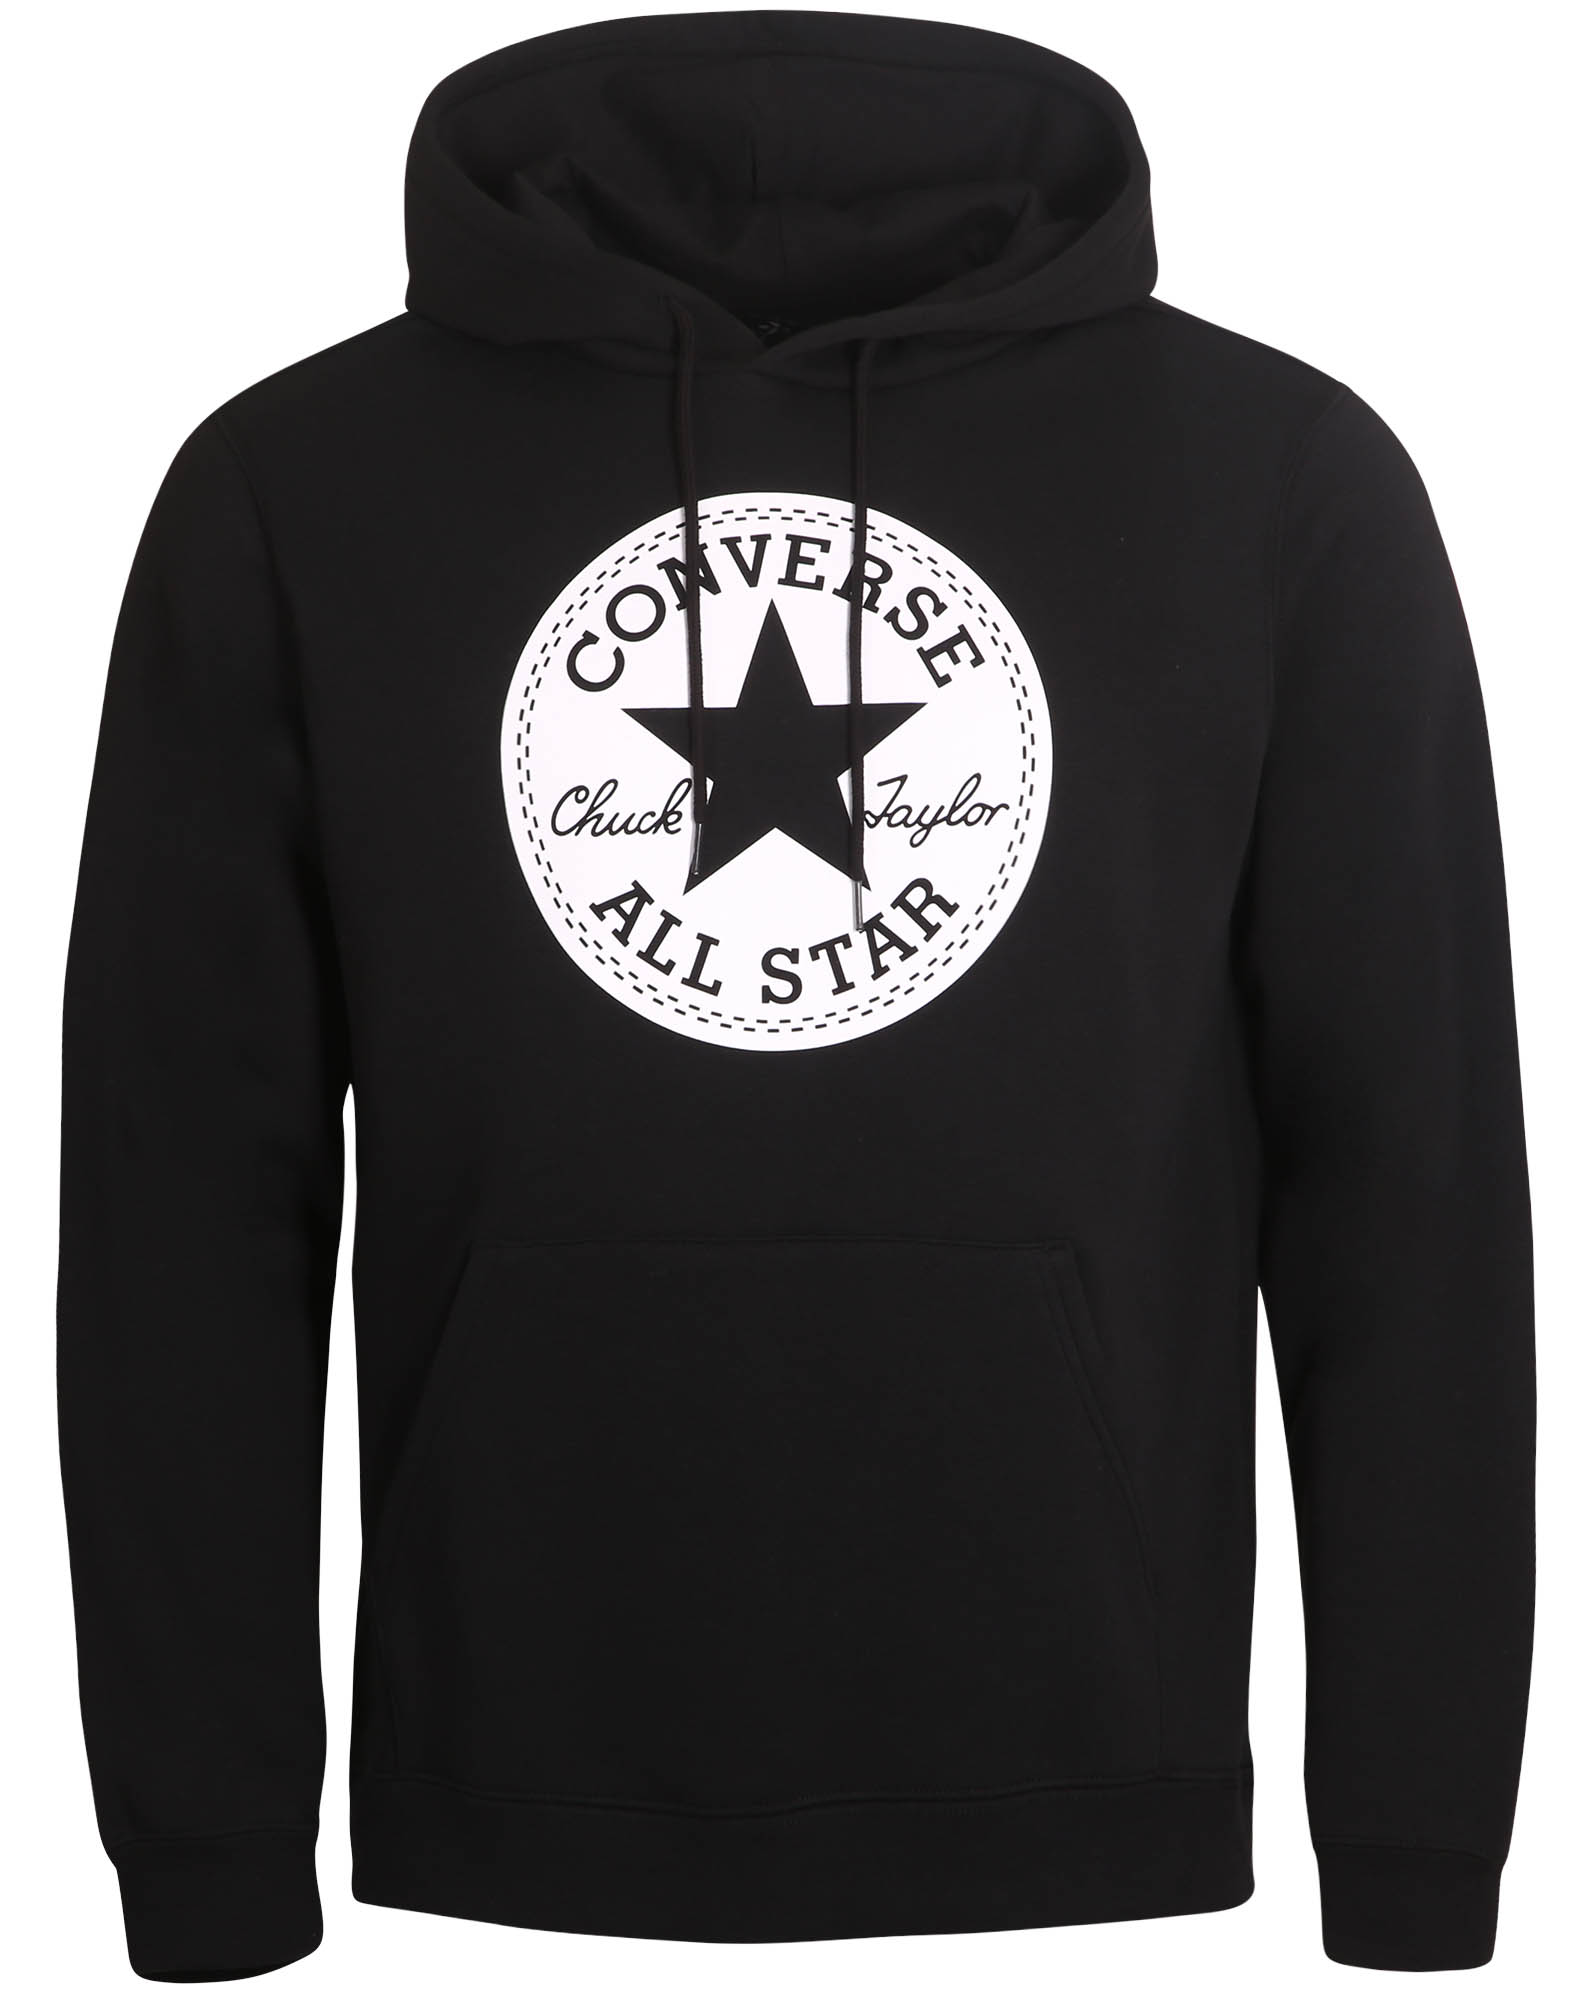 Converse Go-To All Star Patch Standard-Fit Fleece Pullover Hoodie